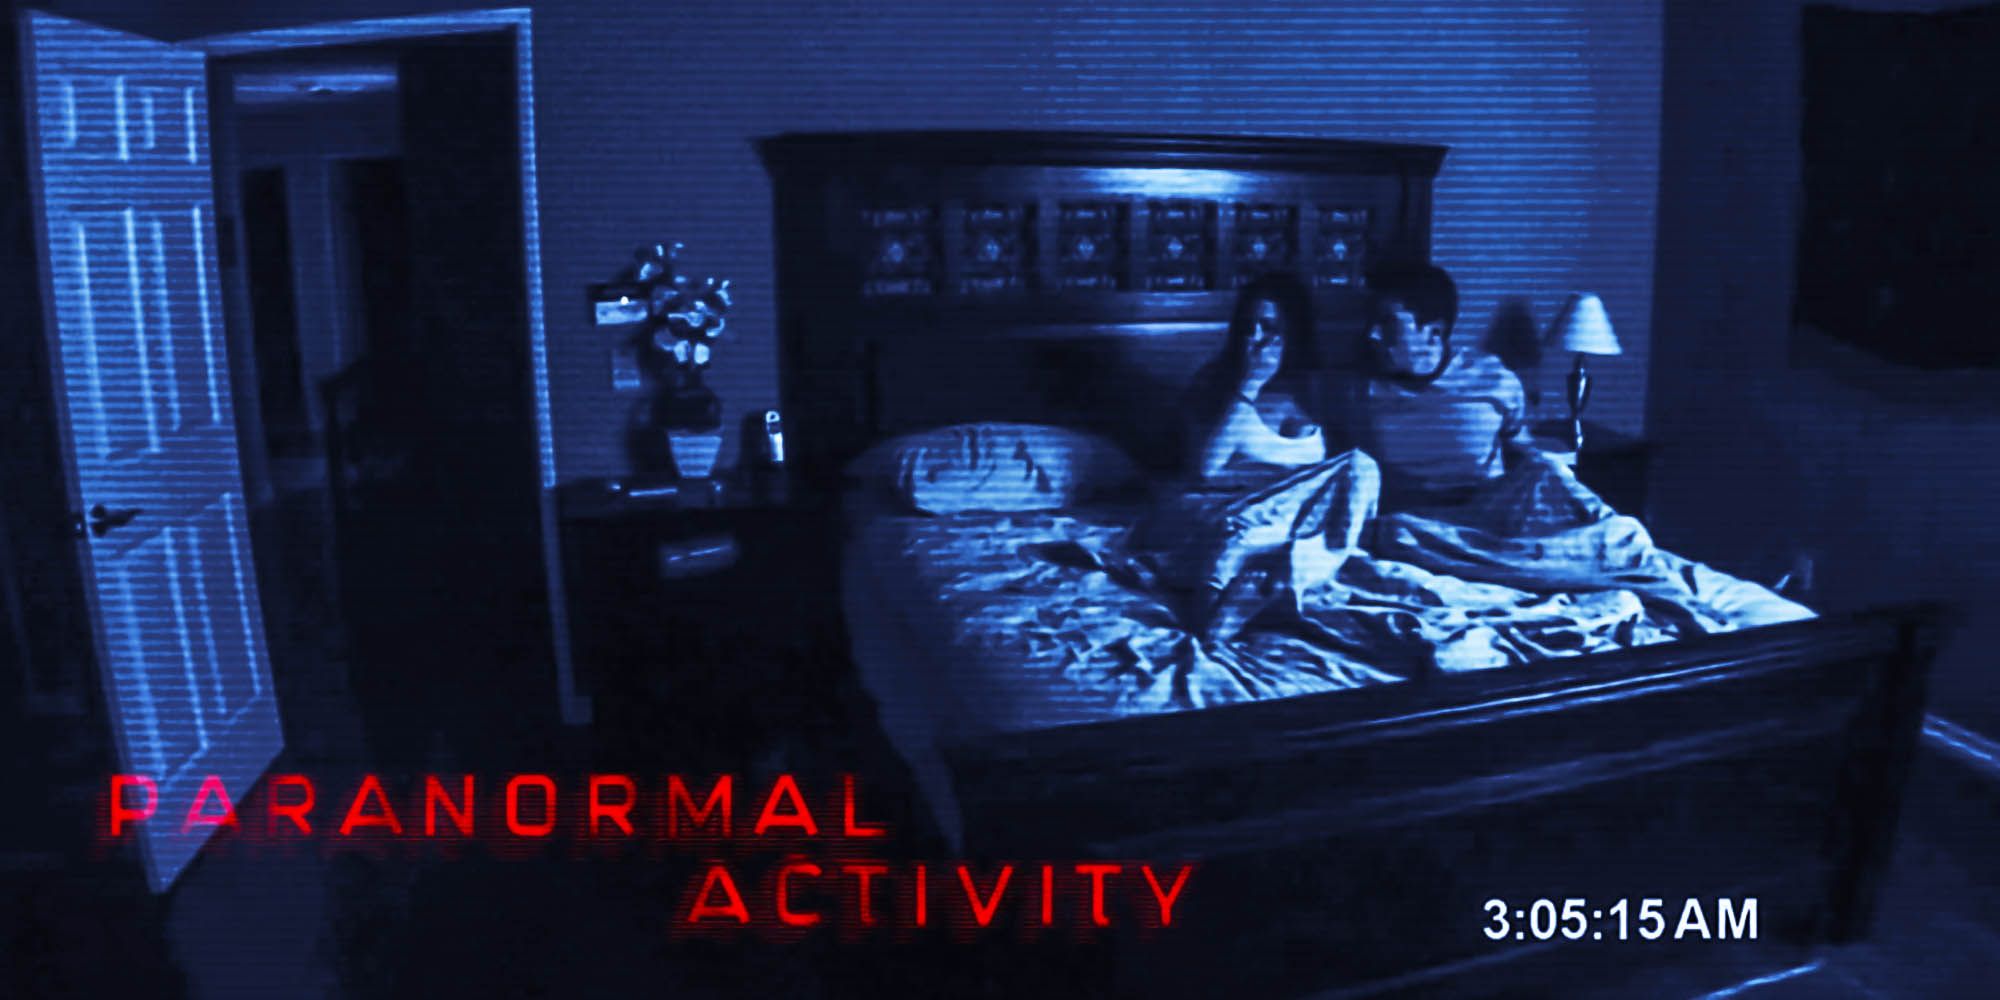 Paranormal activity started found footage craze